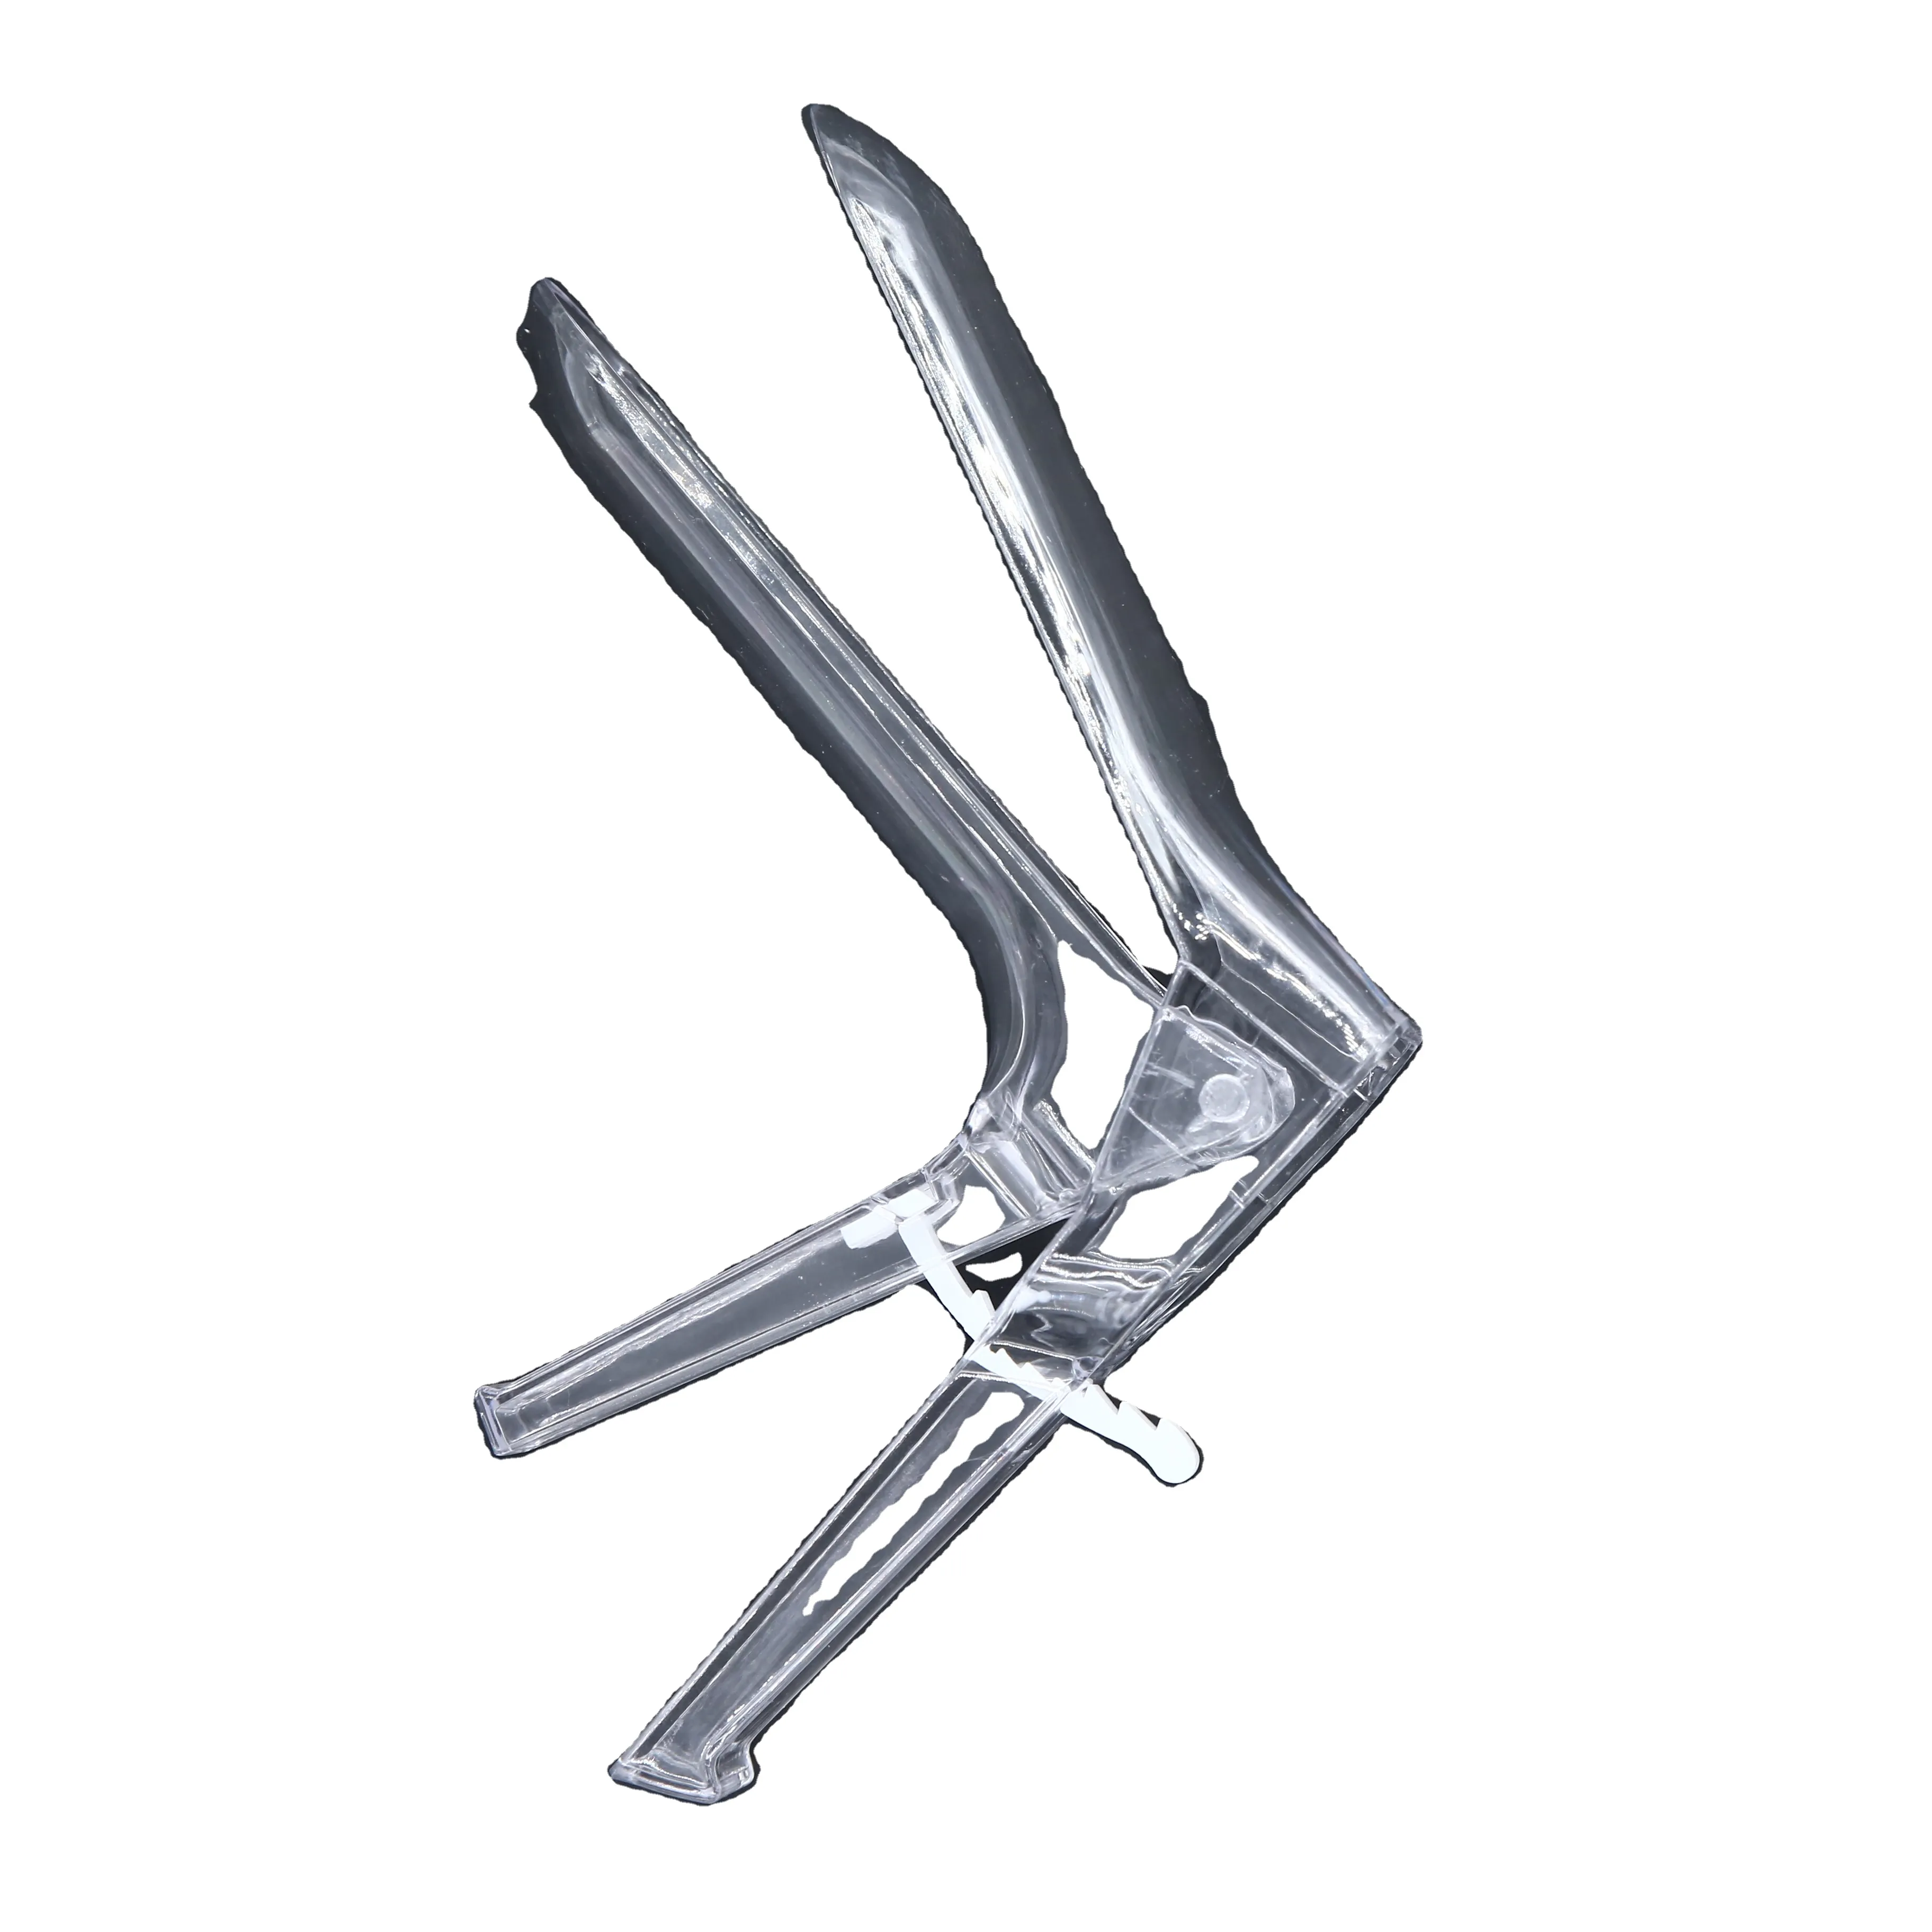 Disposable sterile vaginal expander for hospital obstetrics and gynecology